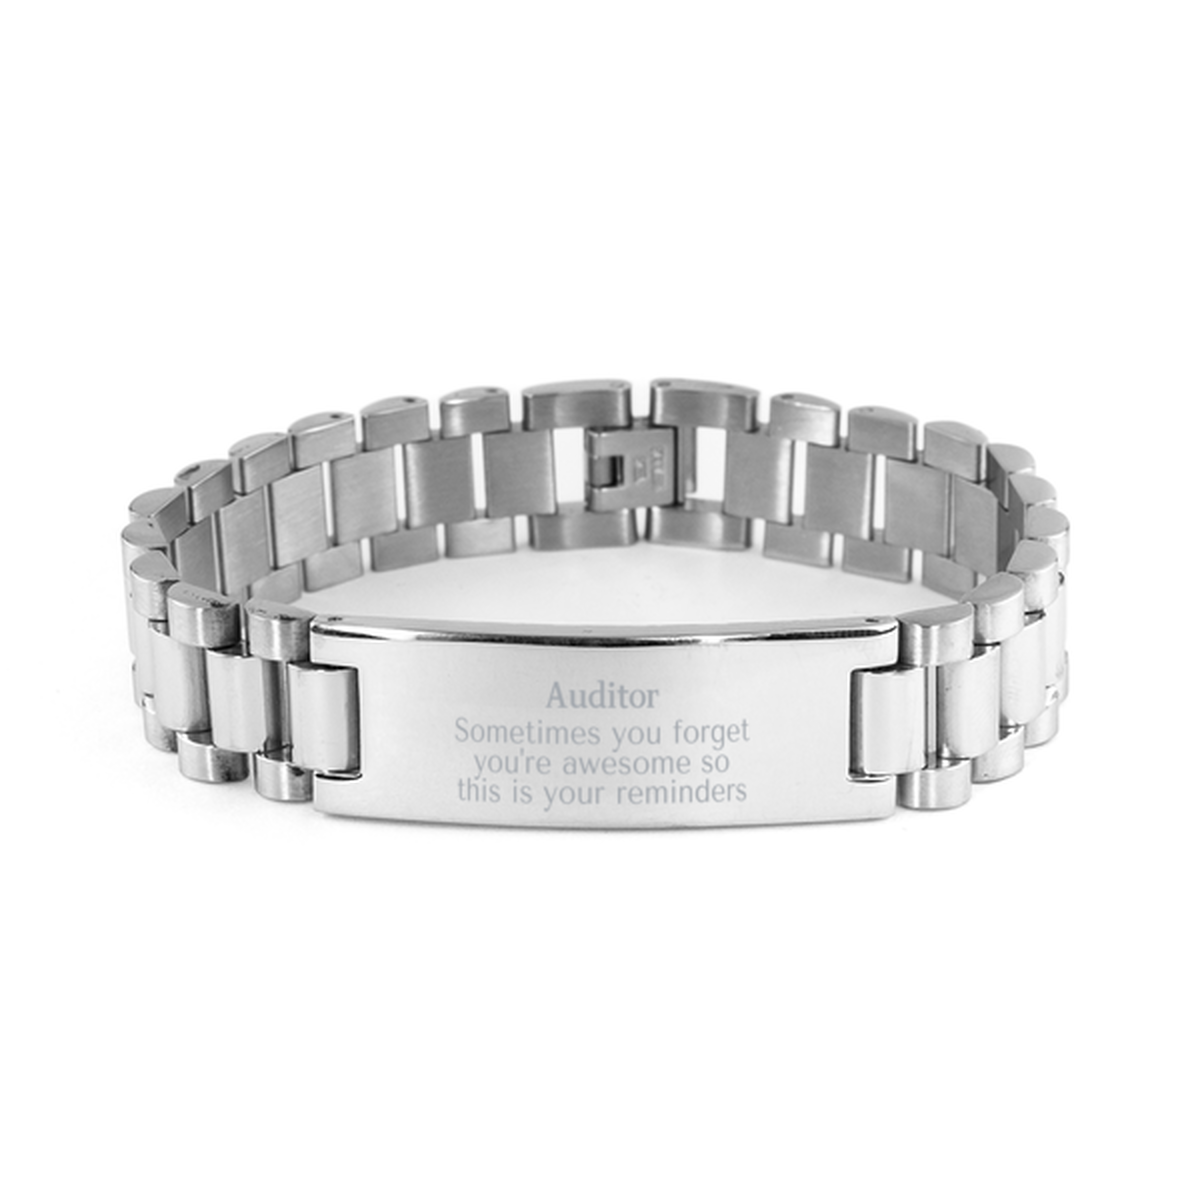 Sentimental Auditor Ladder Stainless Steel Bracelet, Auditor Sometimes you forget you're awesome so this is your reminders, Graduation Christmas Birthday Gifts for Auditor, Men, Women, Coworkers